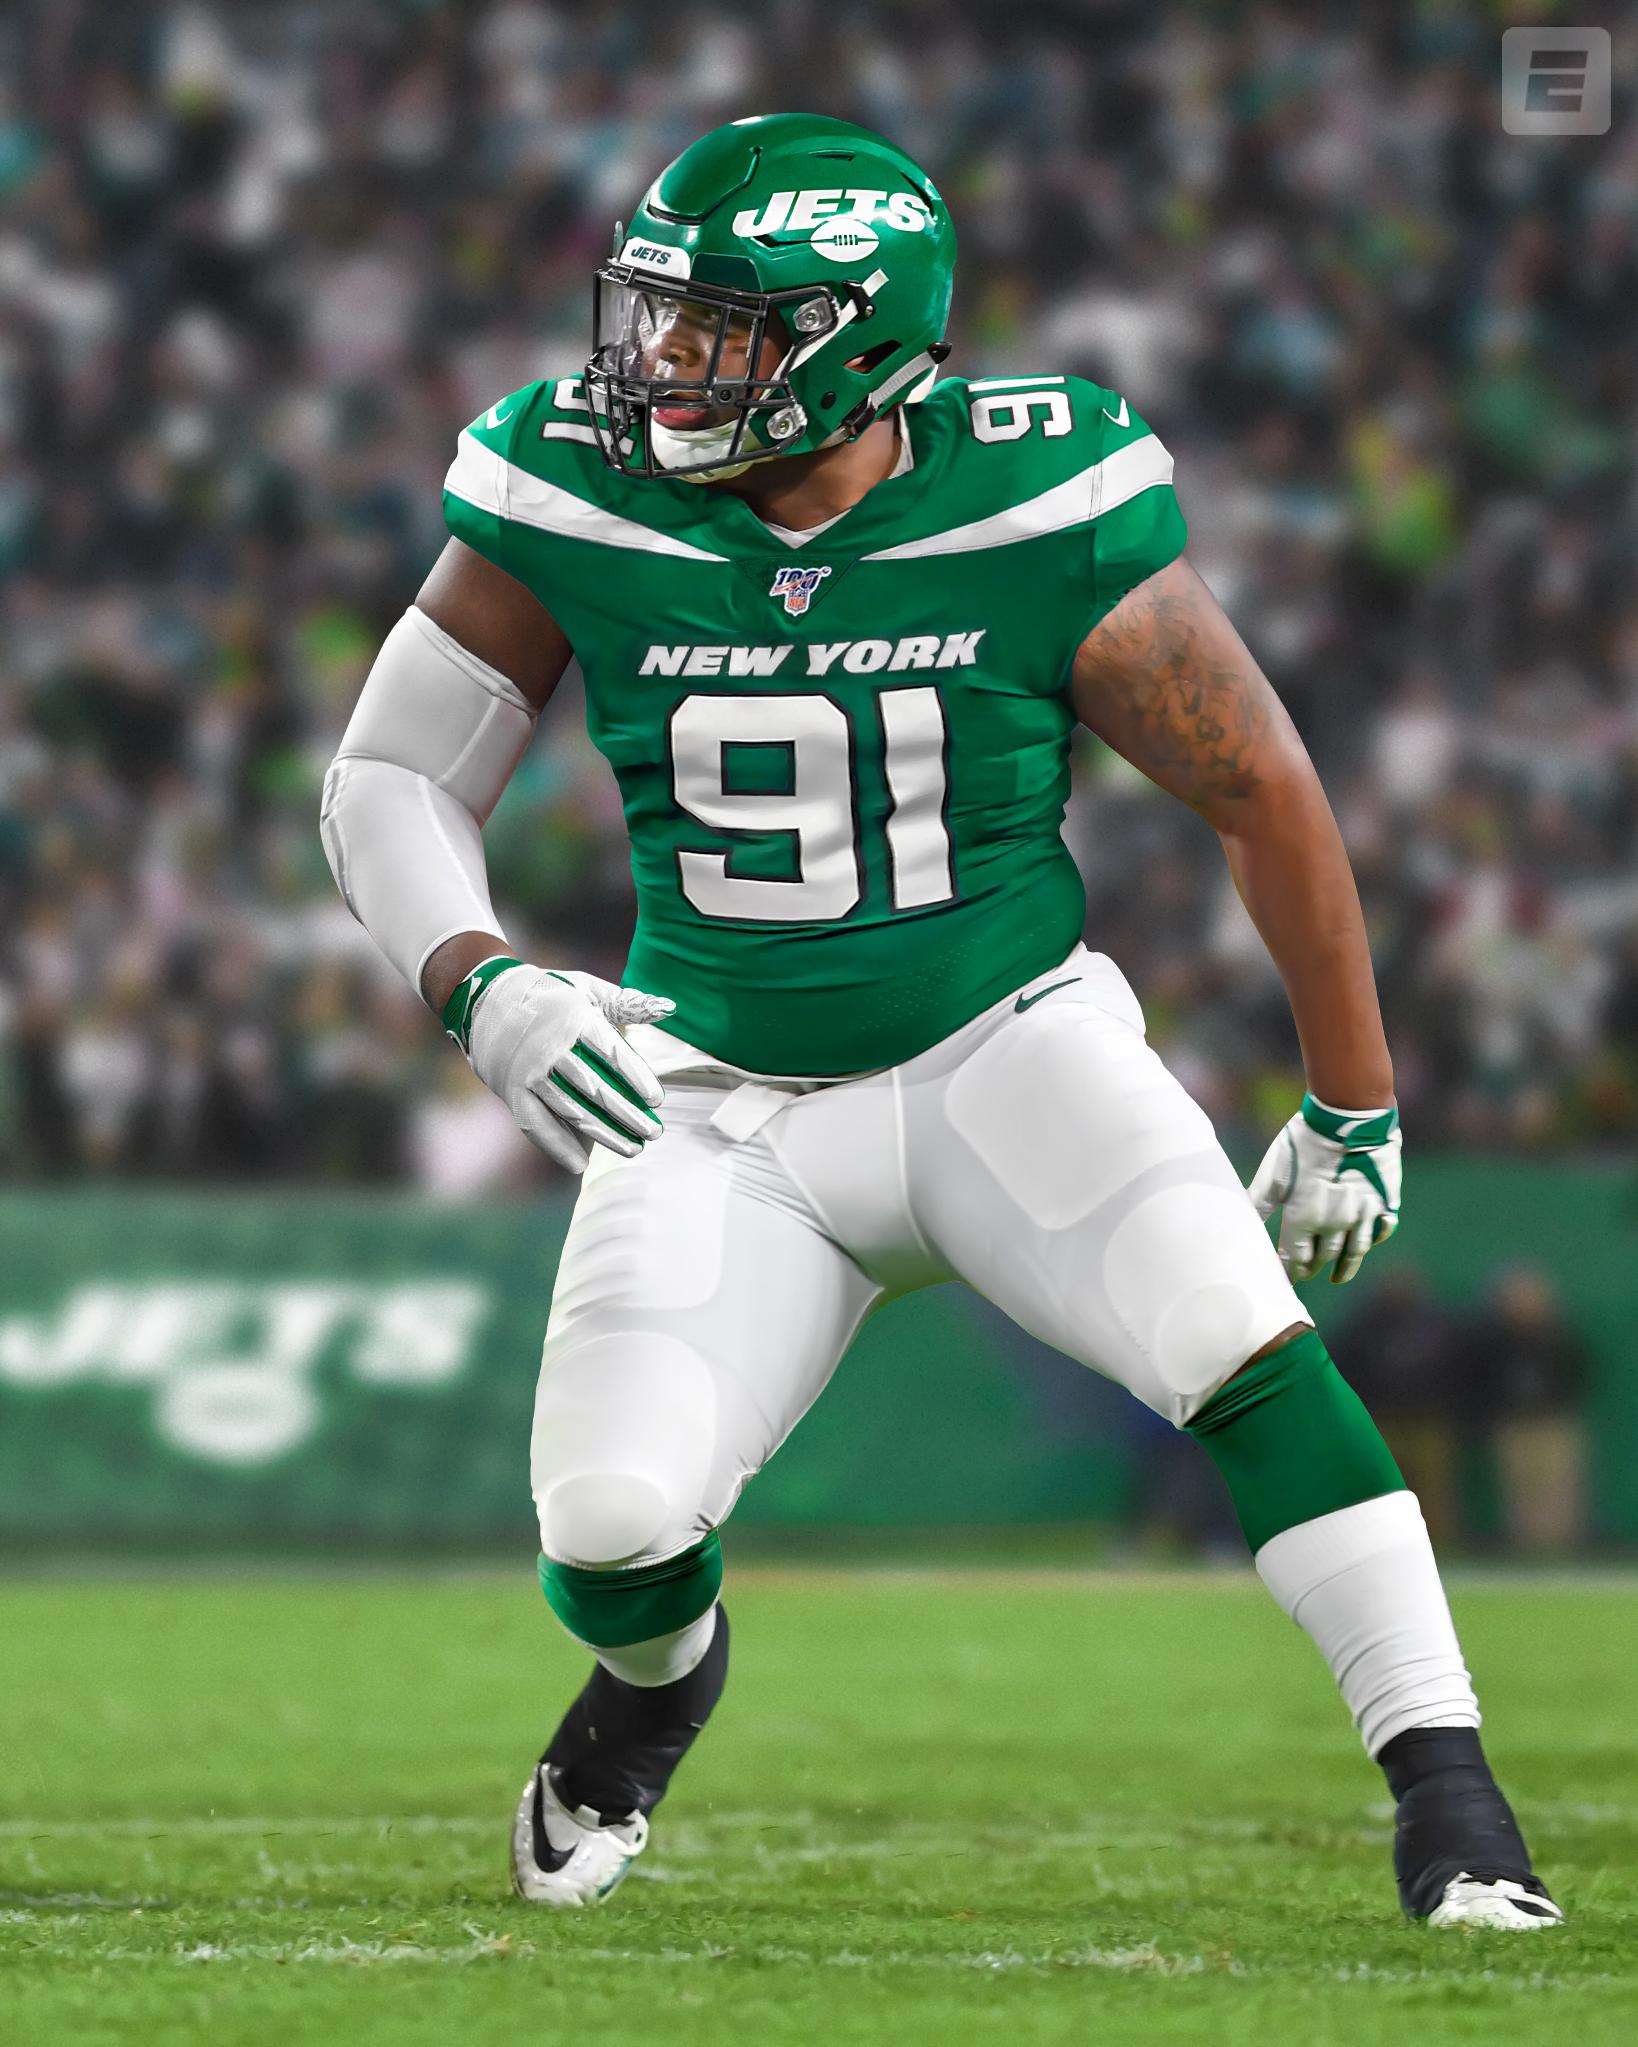 SportsCenter on X: 'THE NY JETS TAKE QUINNEN WILLIAMS WITH THE NO